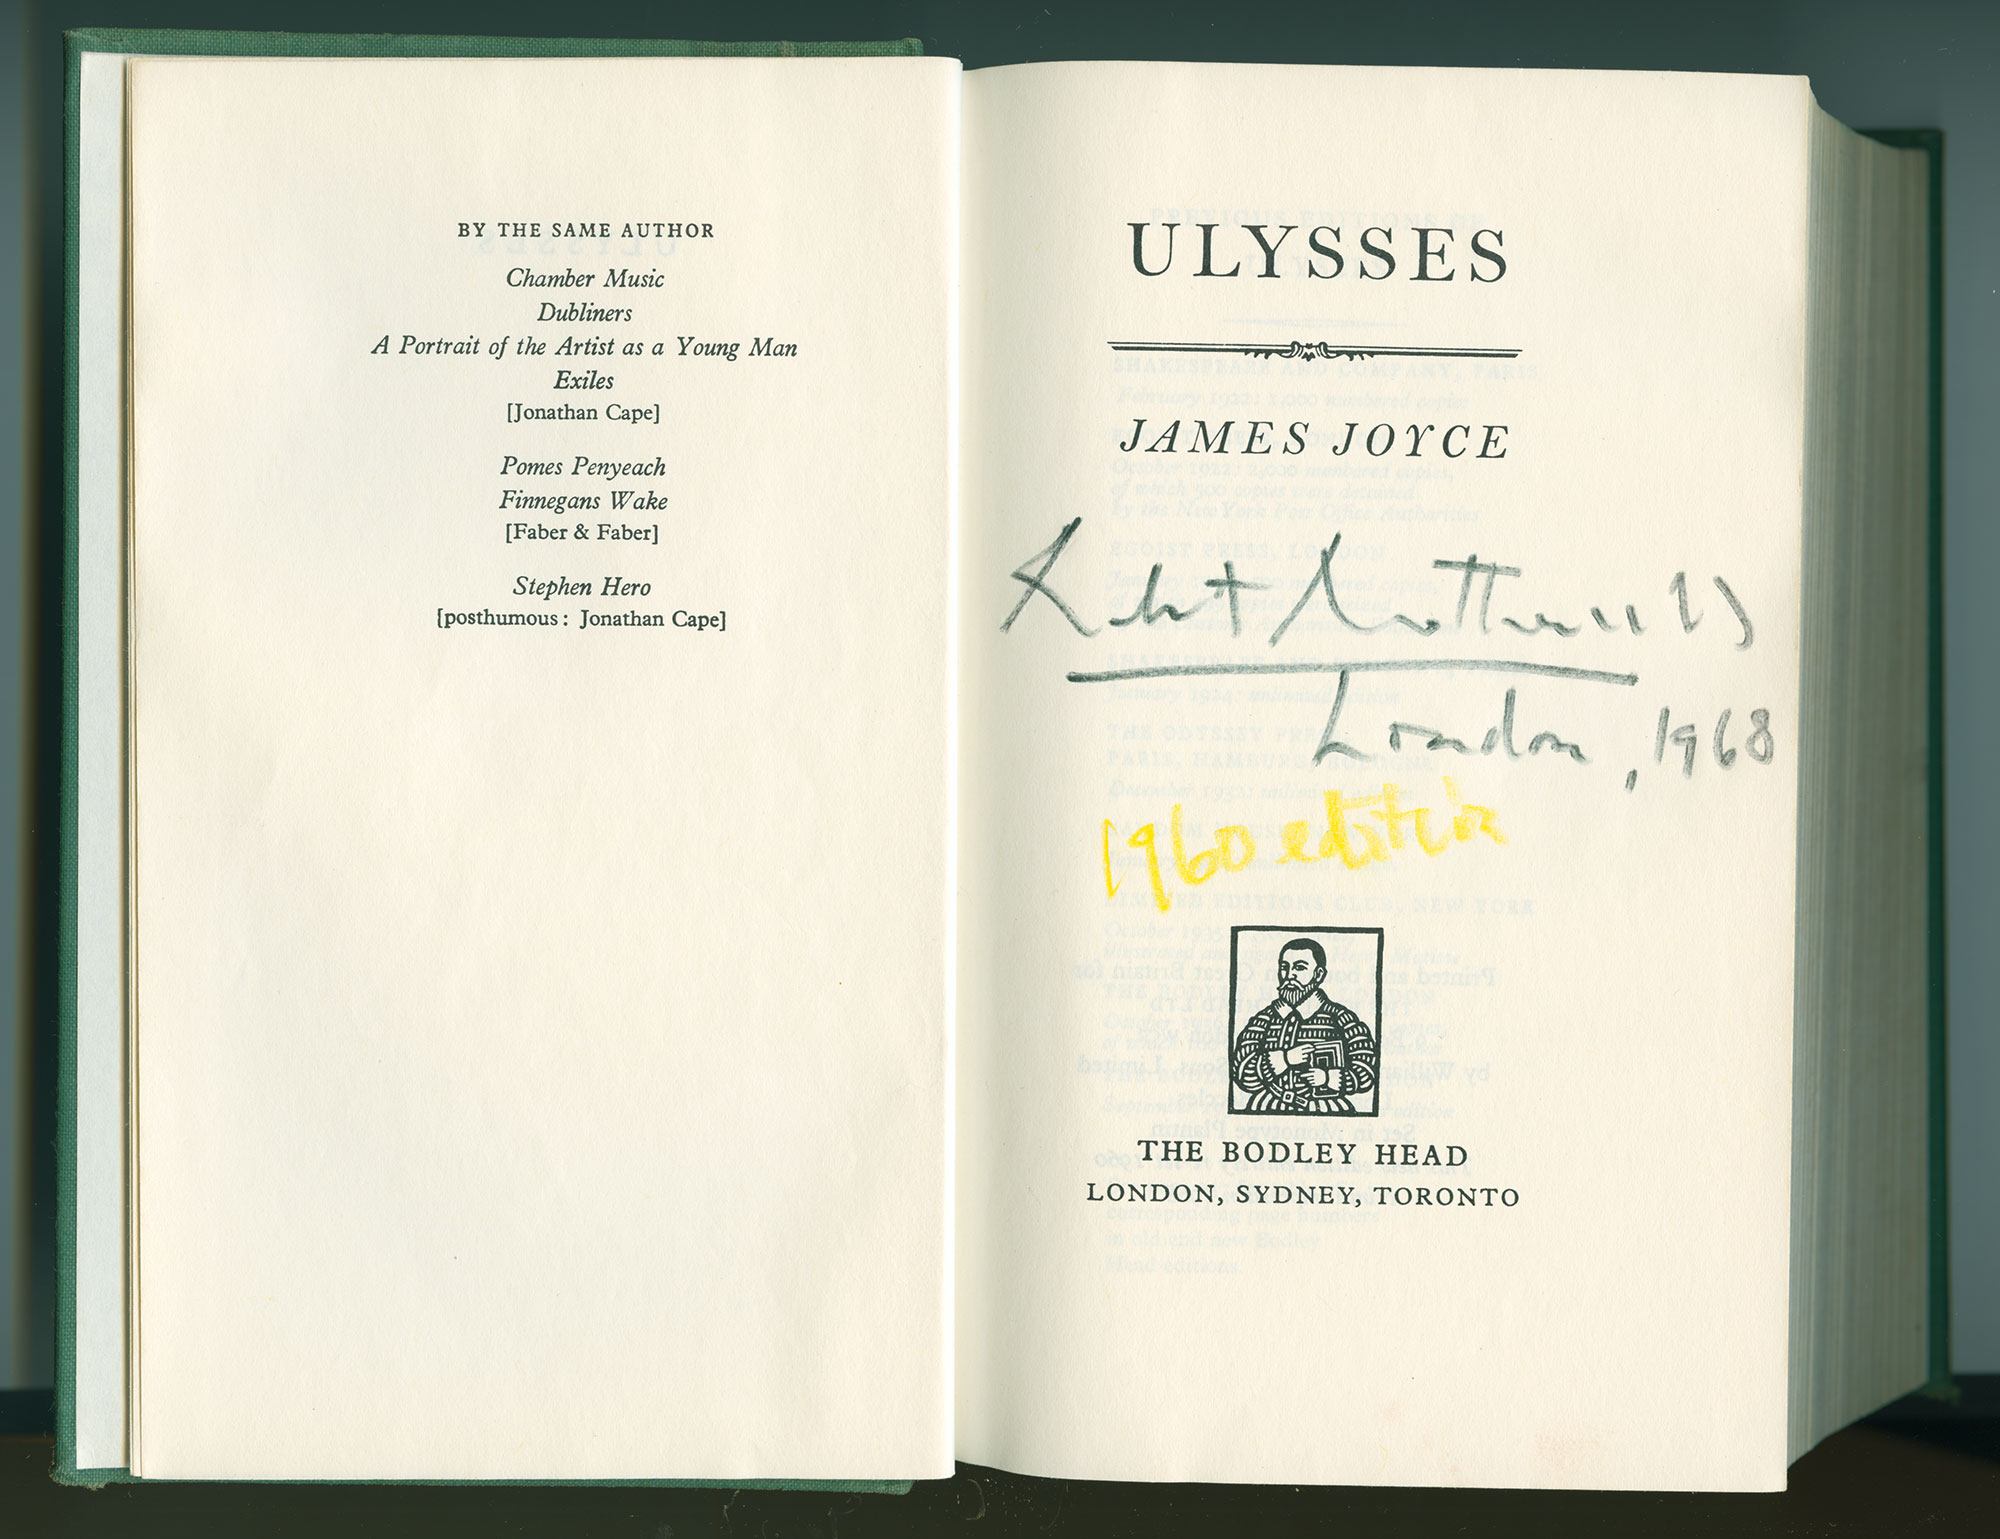 The first page of Ulysses with Robert Motherwell's name written in